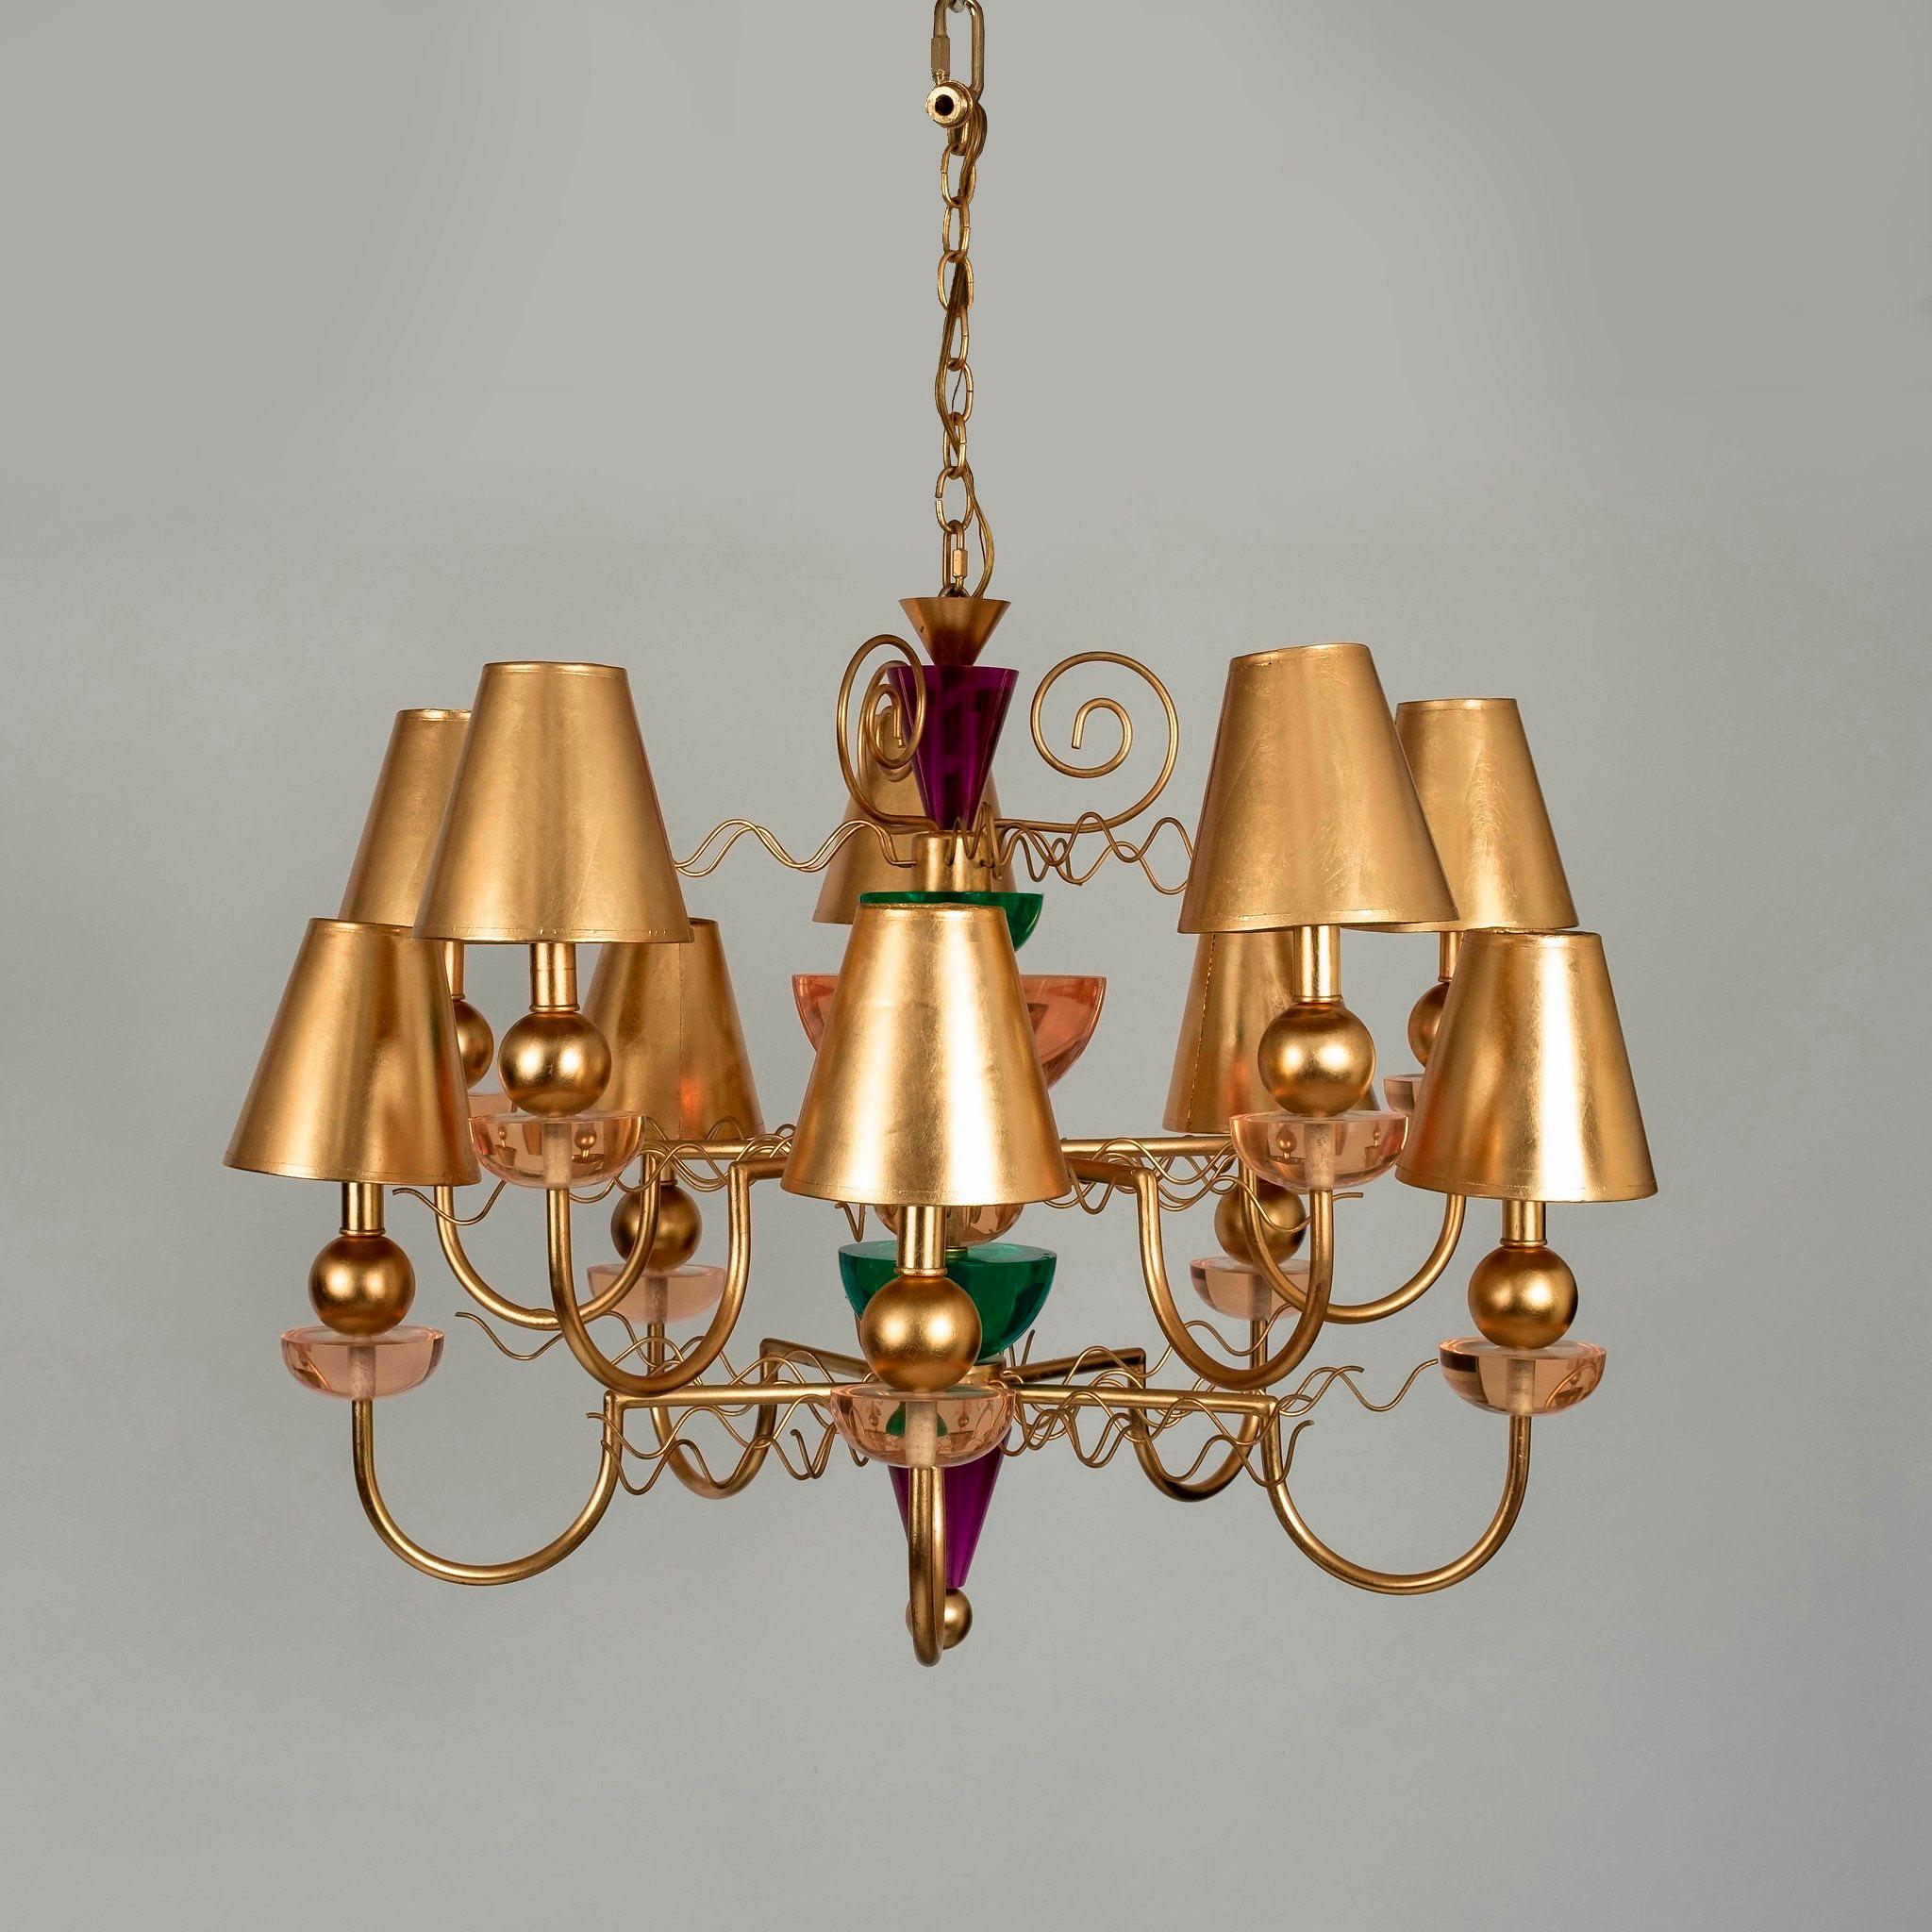 Avant garde ten light Memphis style Hivo Van teal chandelier. This gilt metal chandelier features multicolored hand crafted lucite and handmade gilt paper shades.